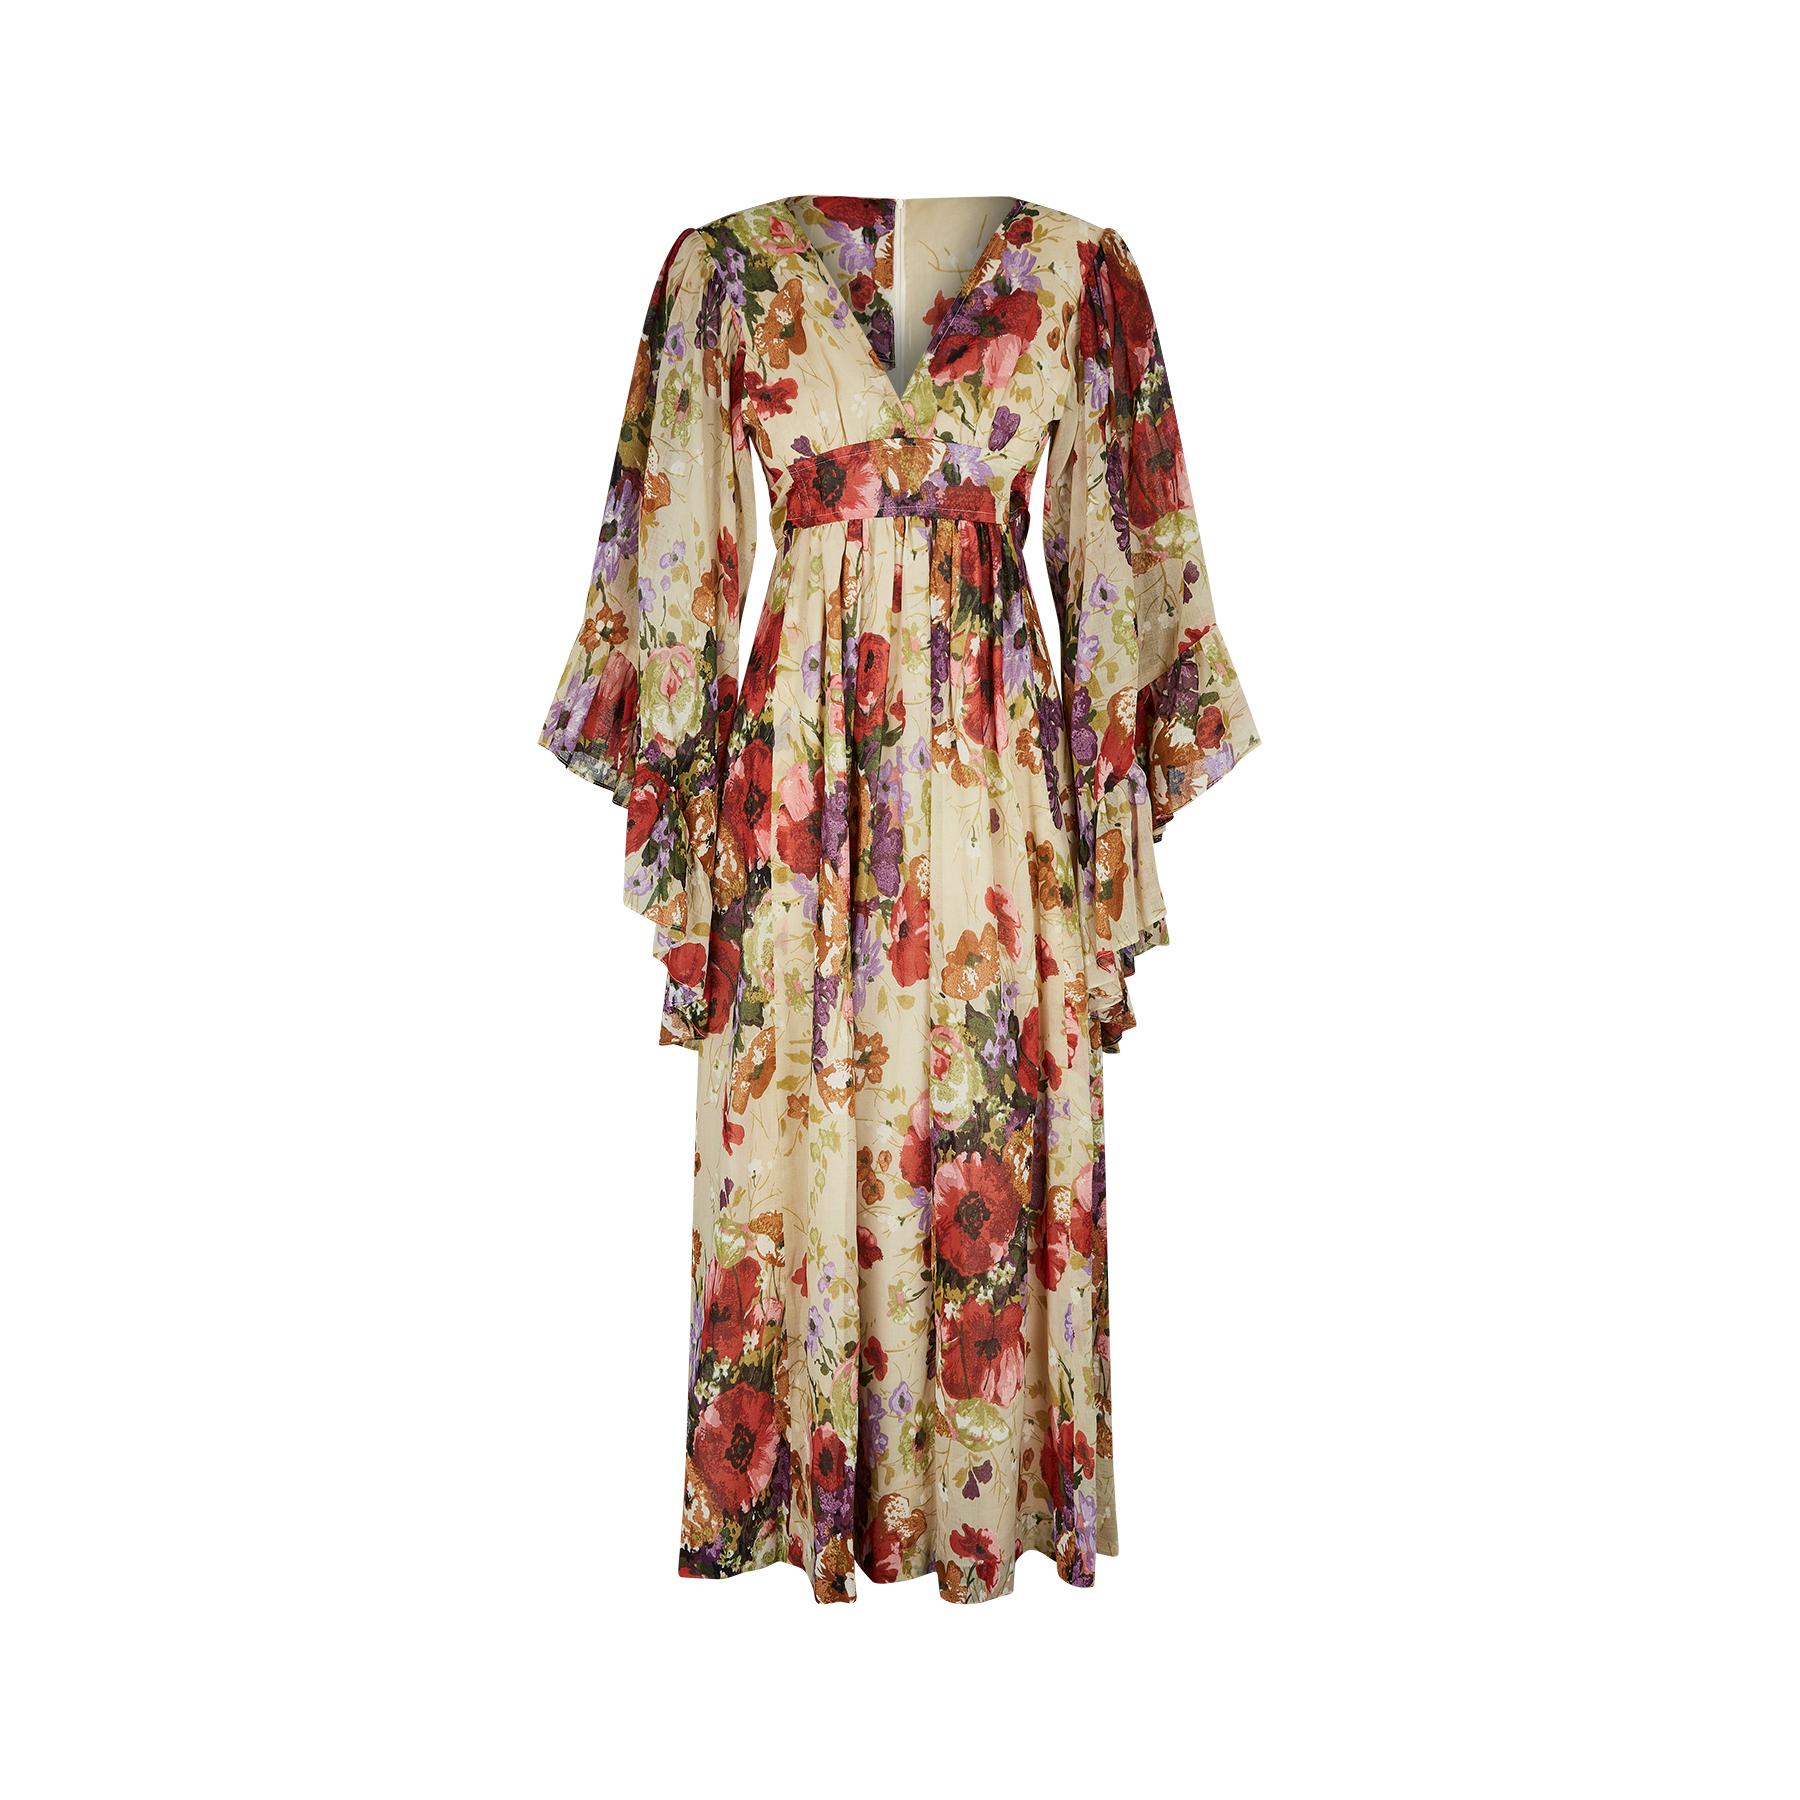 This is such a great print and the condition of this 1970s original angel sleeve dress is pristine.  Made from a lightweight gauze cotton, the dress has a painterly multi-coloured floral arrangement featuring an array of wild meadow flowers